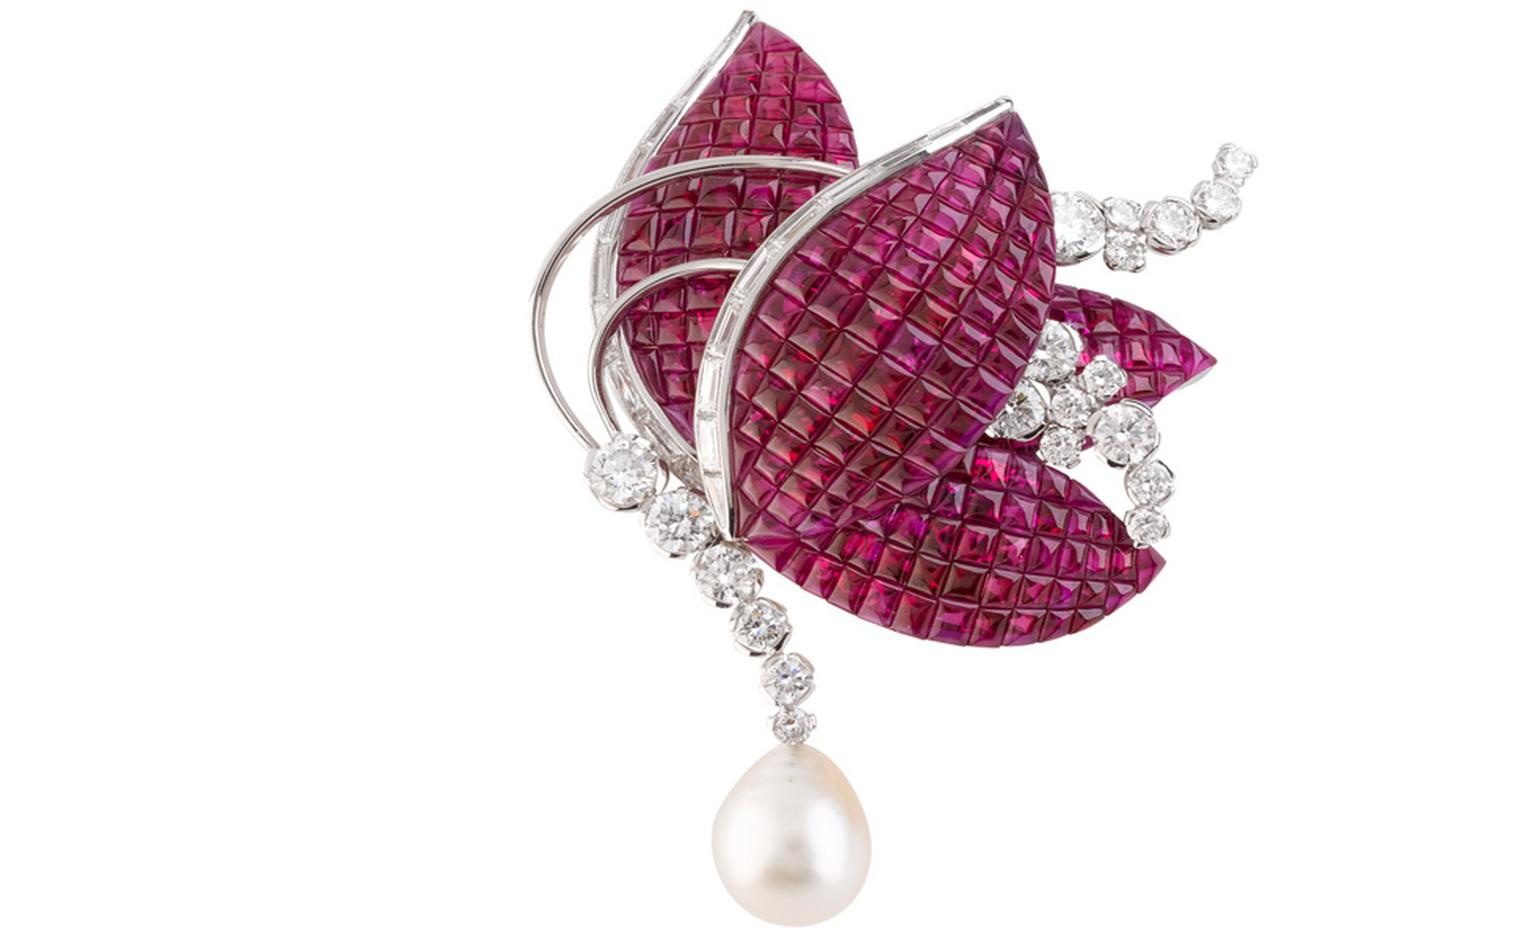 Van Cleef & Arpels Amarylis mystery-set rub, diamond and pearl butterfly brooch